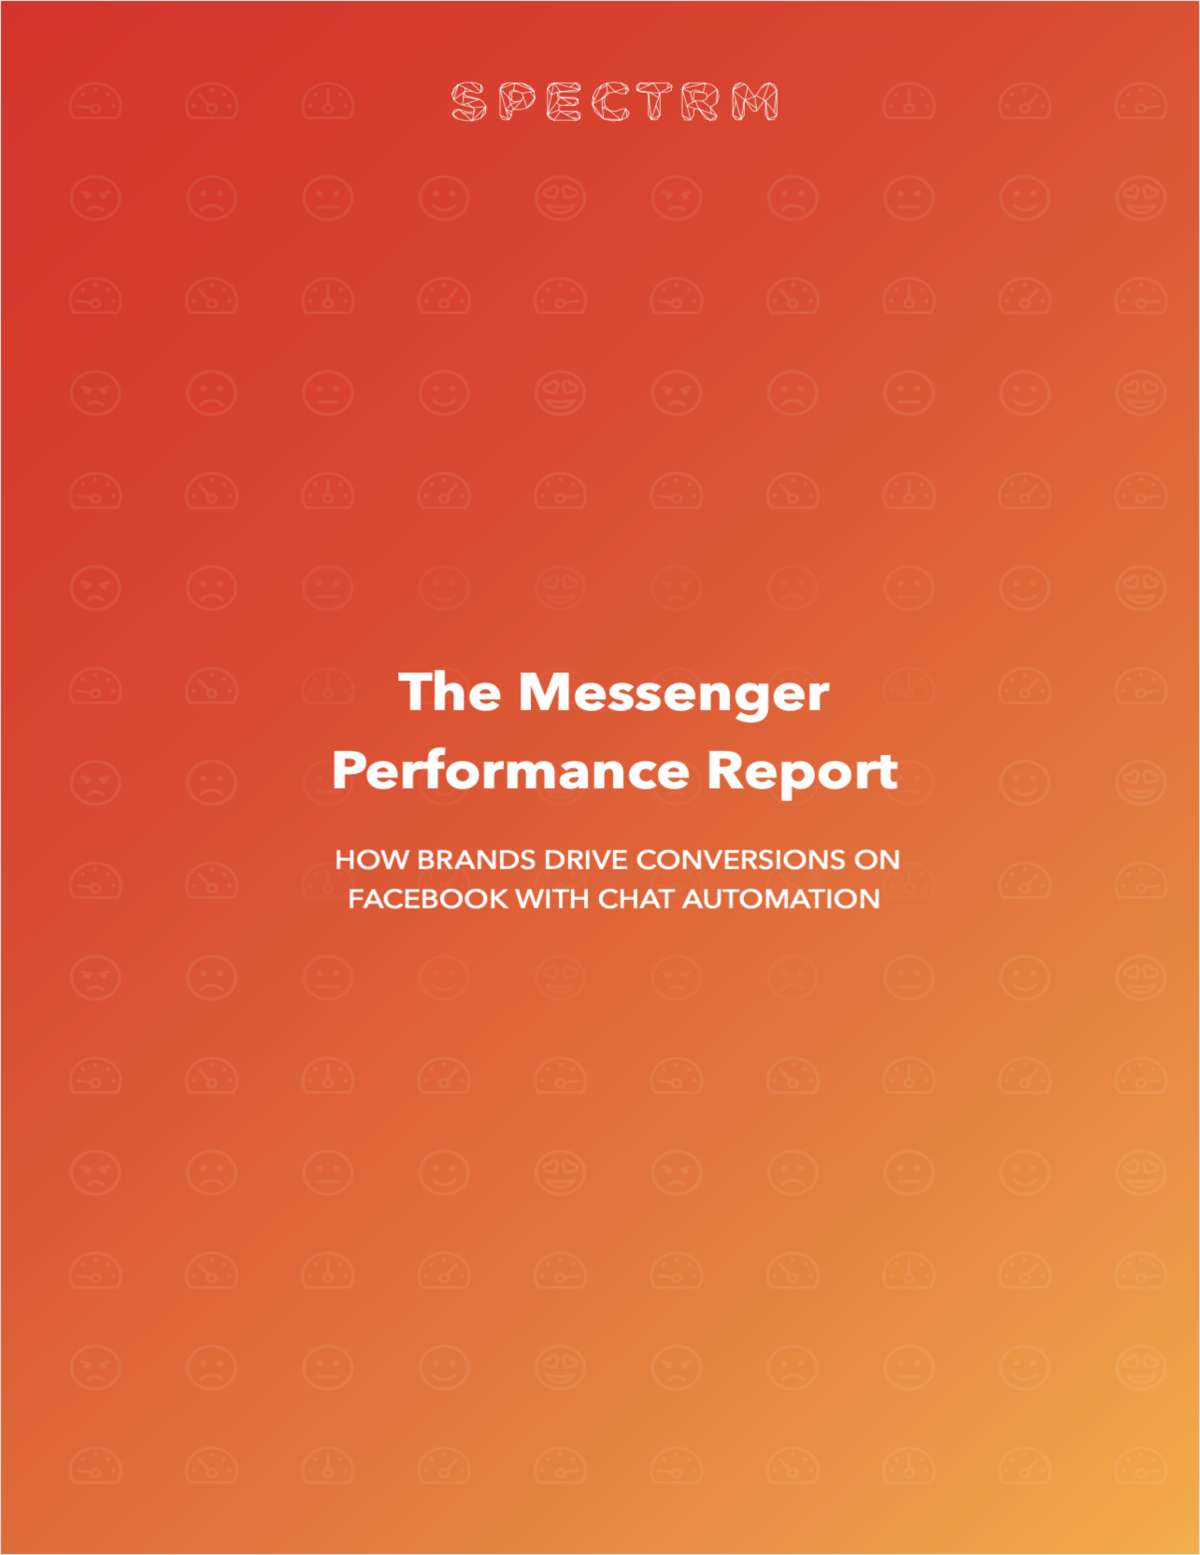 The Messenger Performance Report: How Brands Drive Conversions on Facebook With Chat Automation